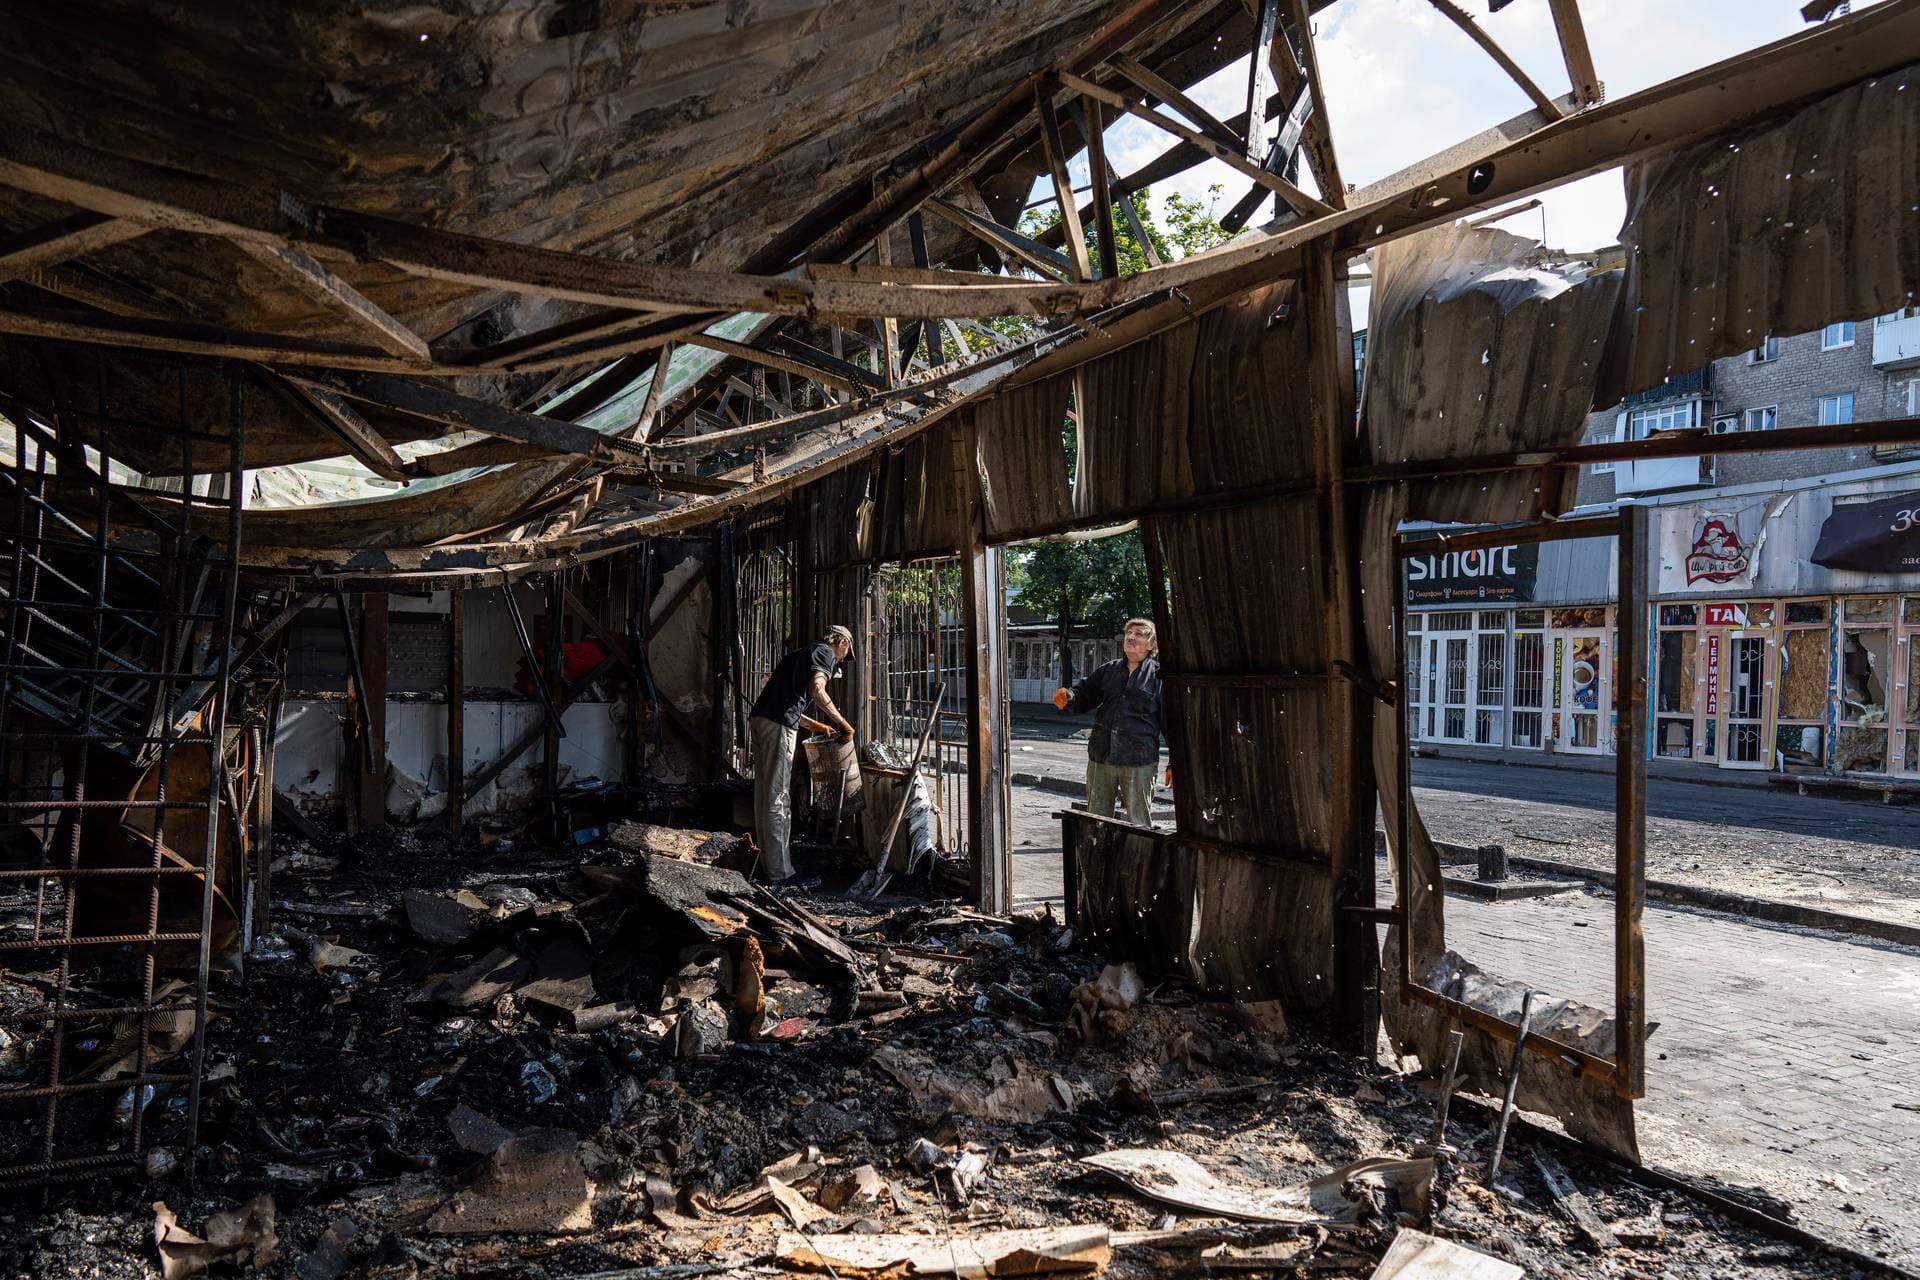 People clear the rubble of a destroyed market after yesterday’s rocket attack in the city center of Kostiantynivka